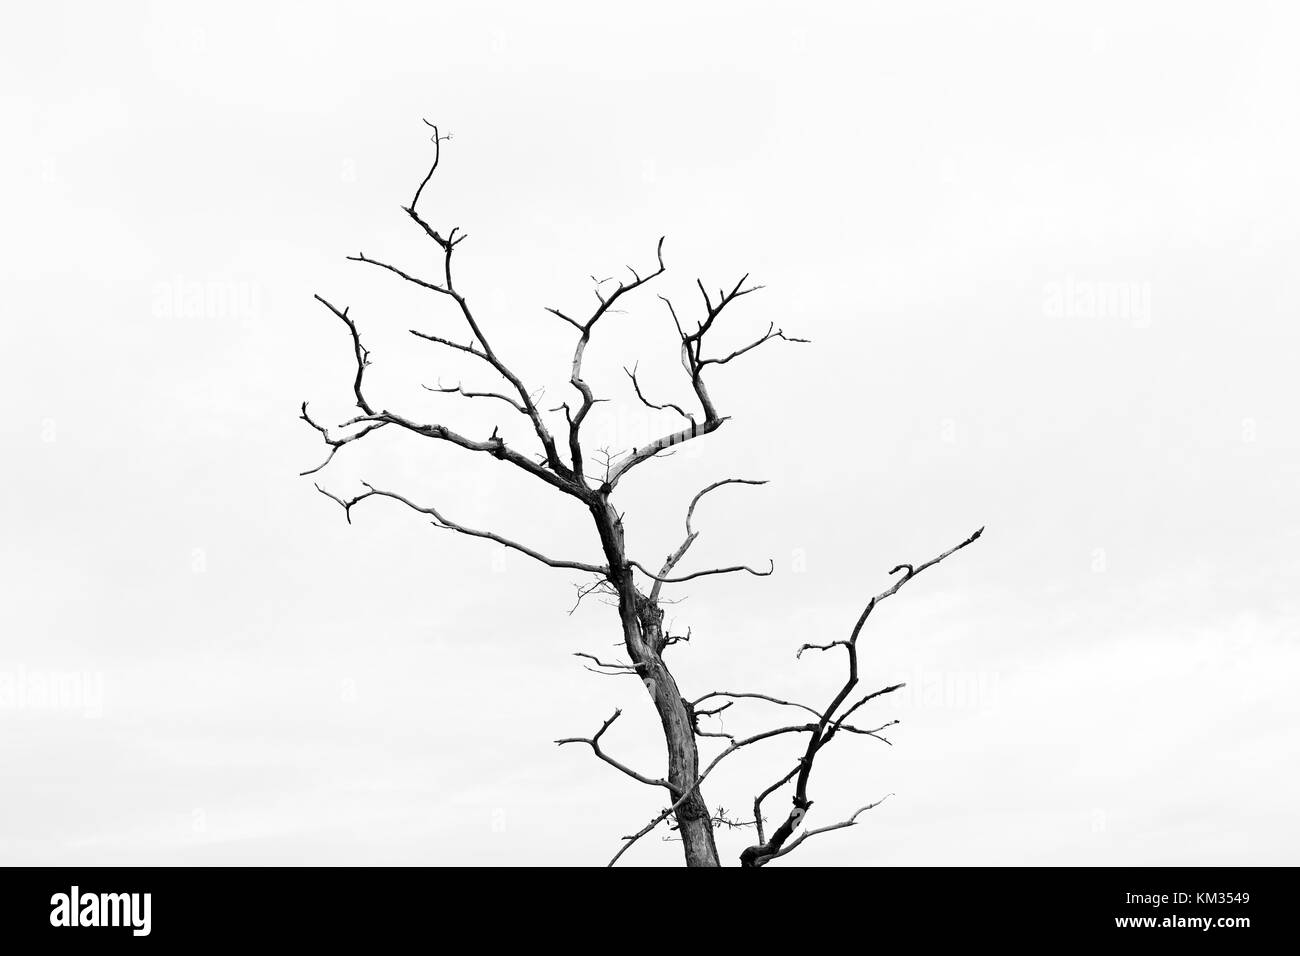 Branches silhouette, old tree, abstract background Stock Photo